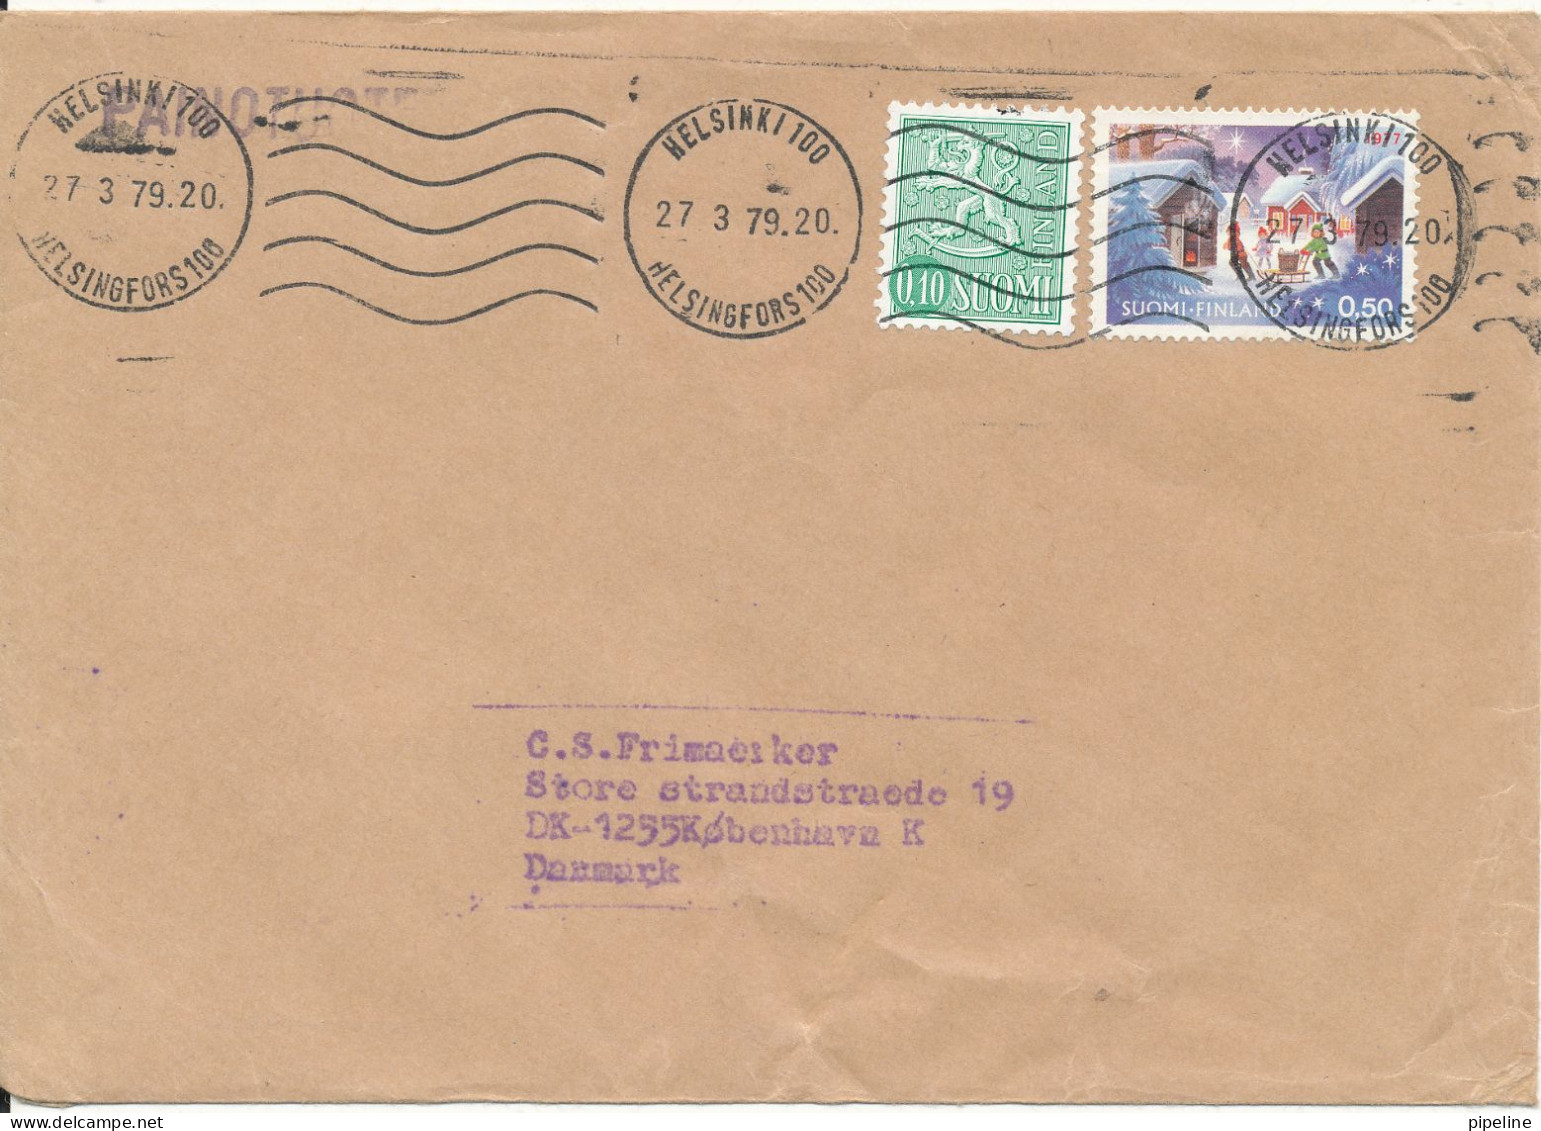 Finland Cover Sent To Denmark Helsinki 27-3-1979 - Covers & Documents